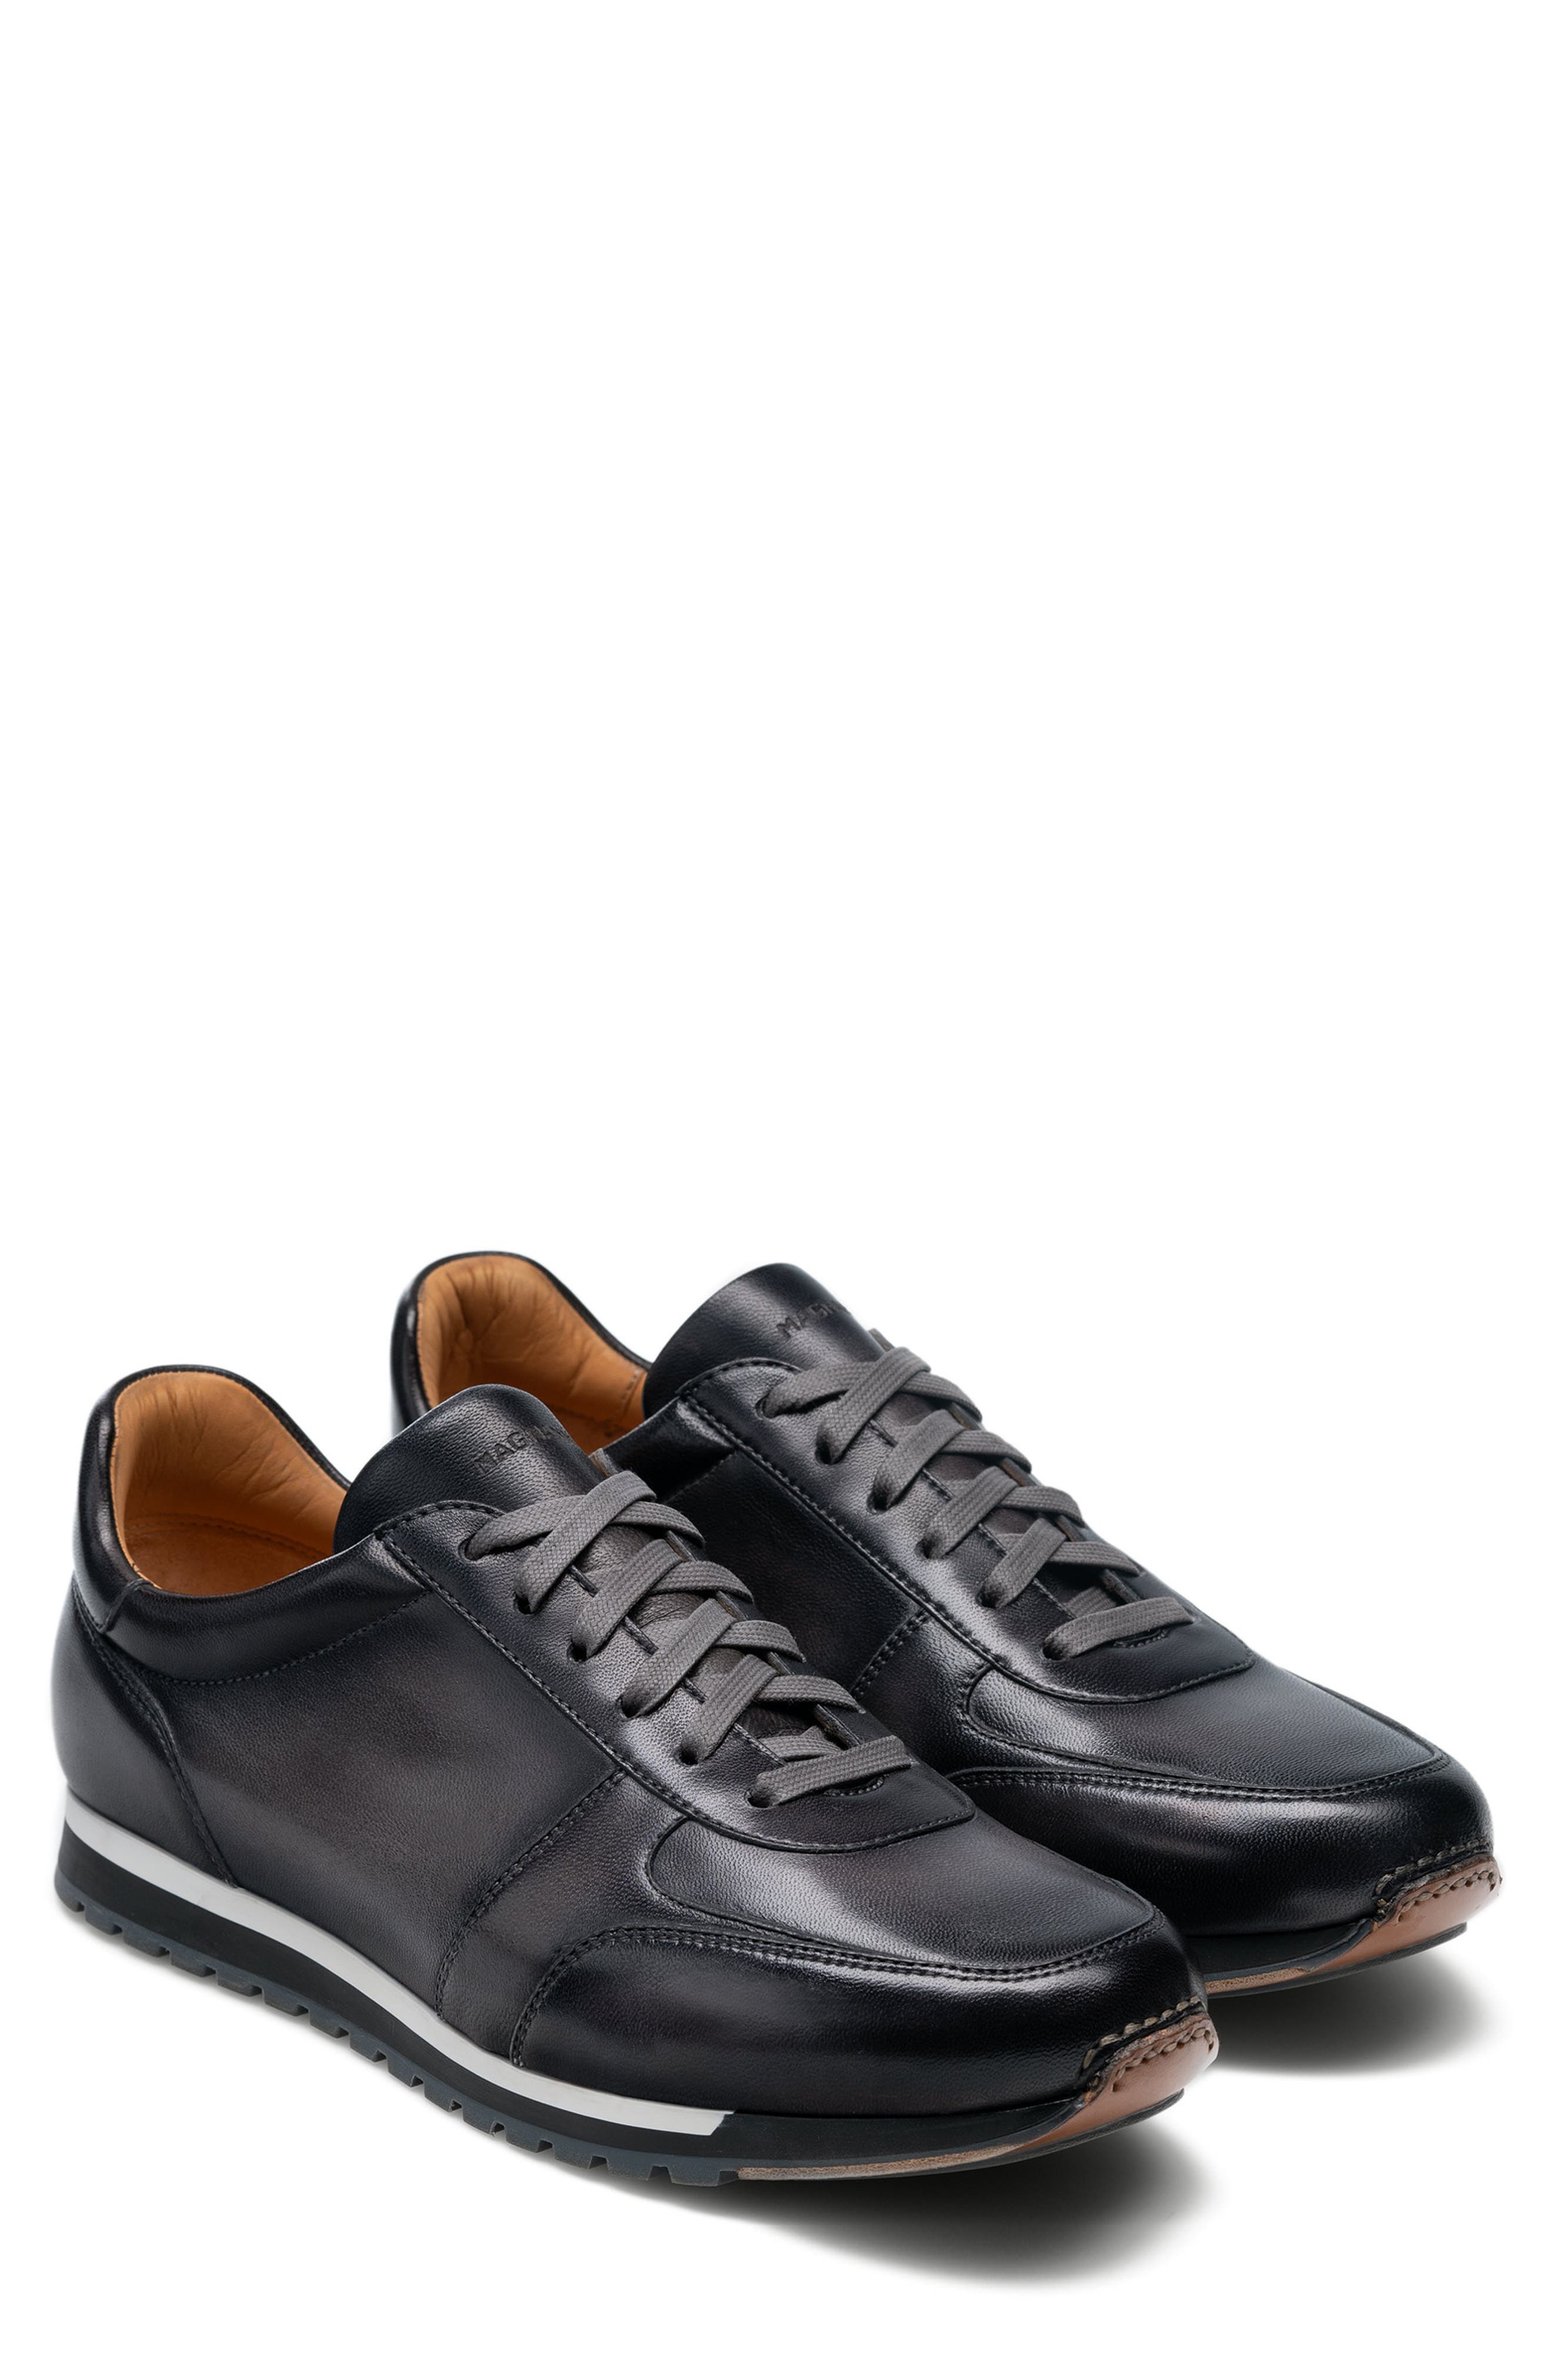 magnanni sneakers nordstrom